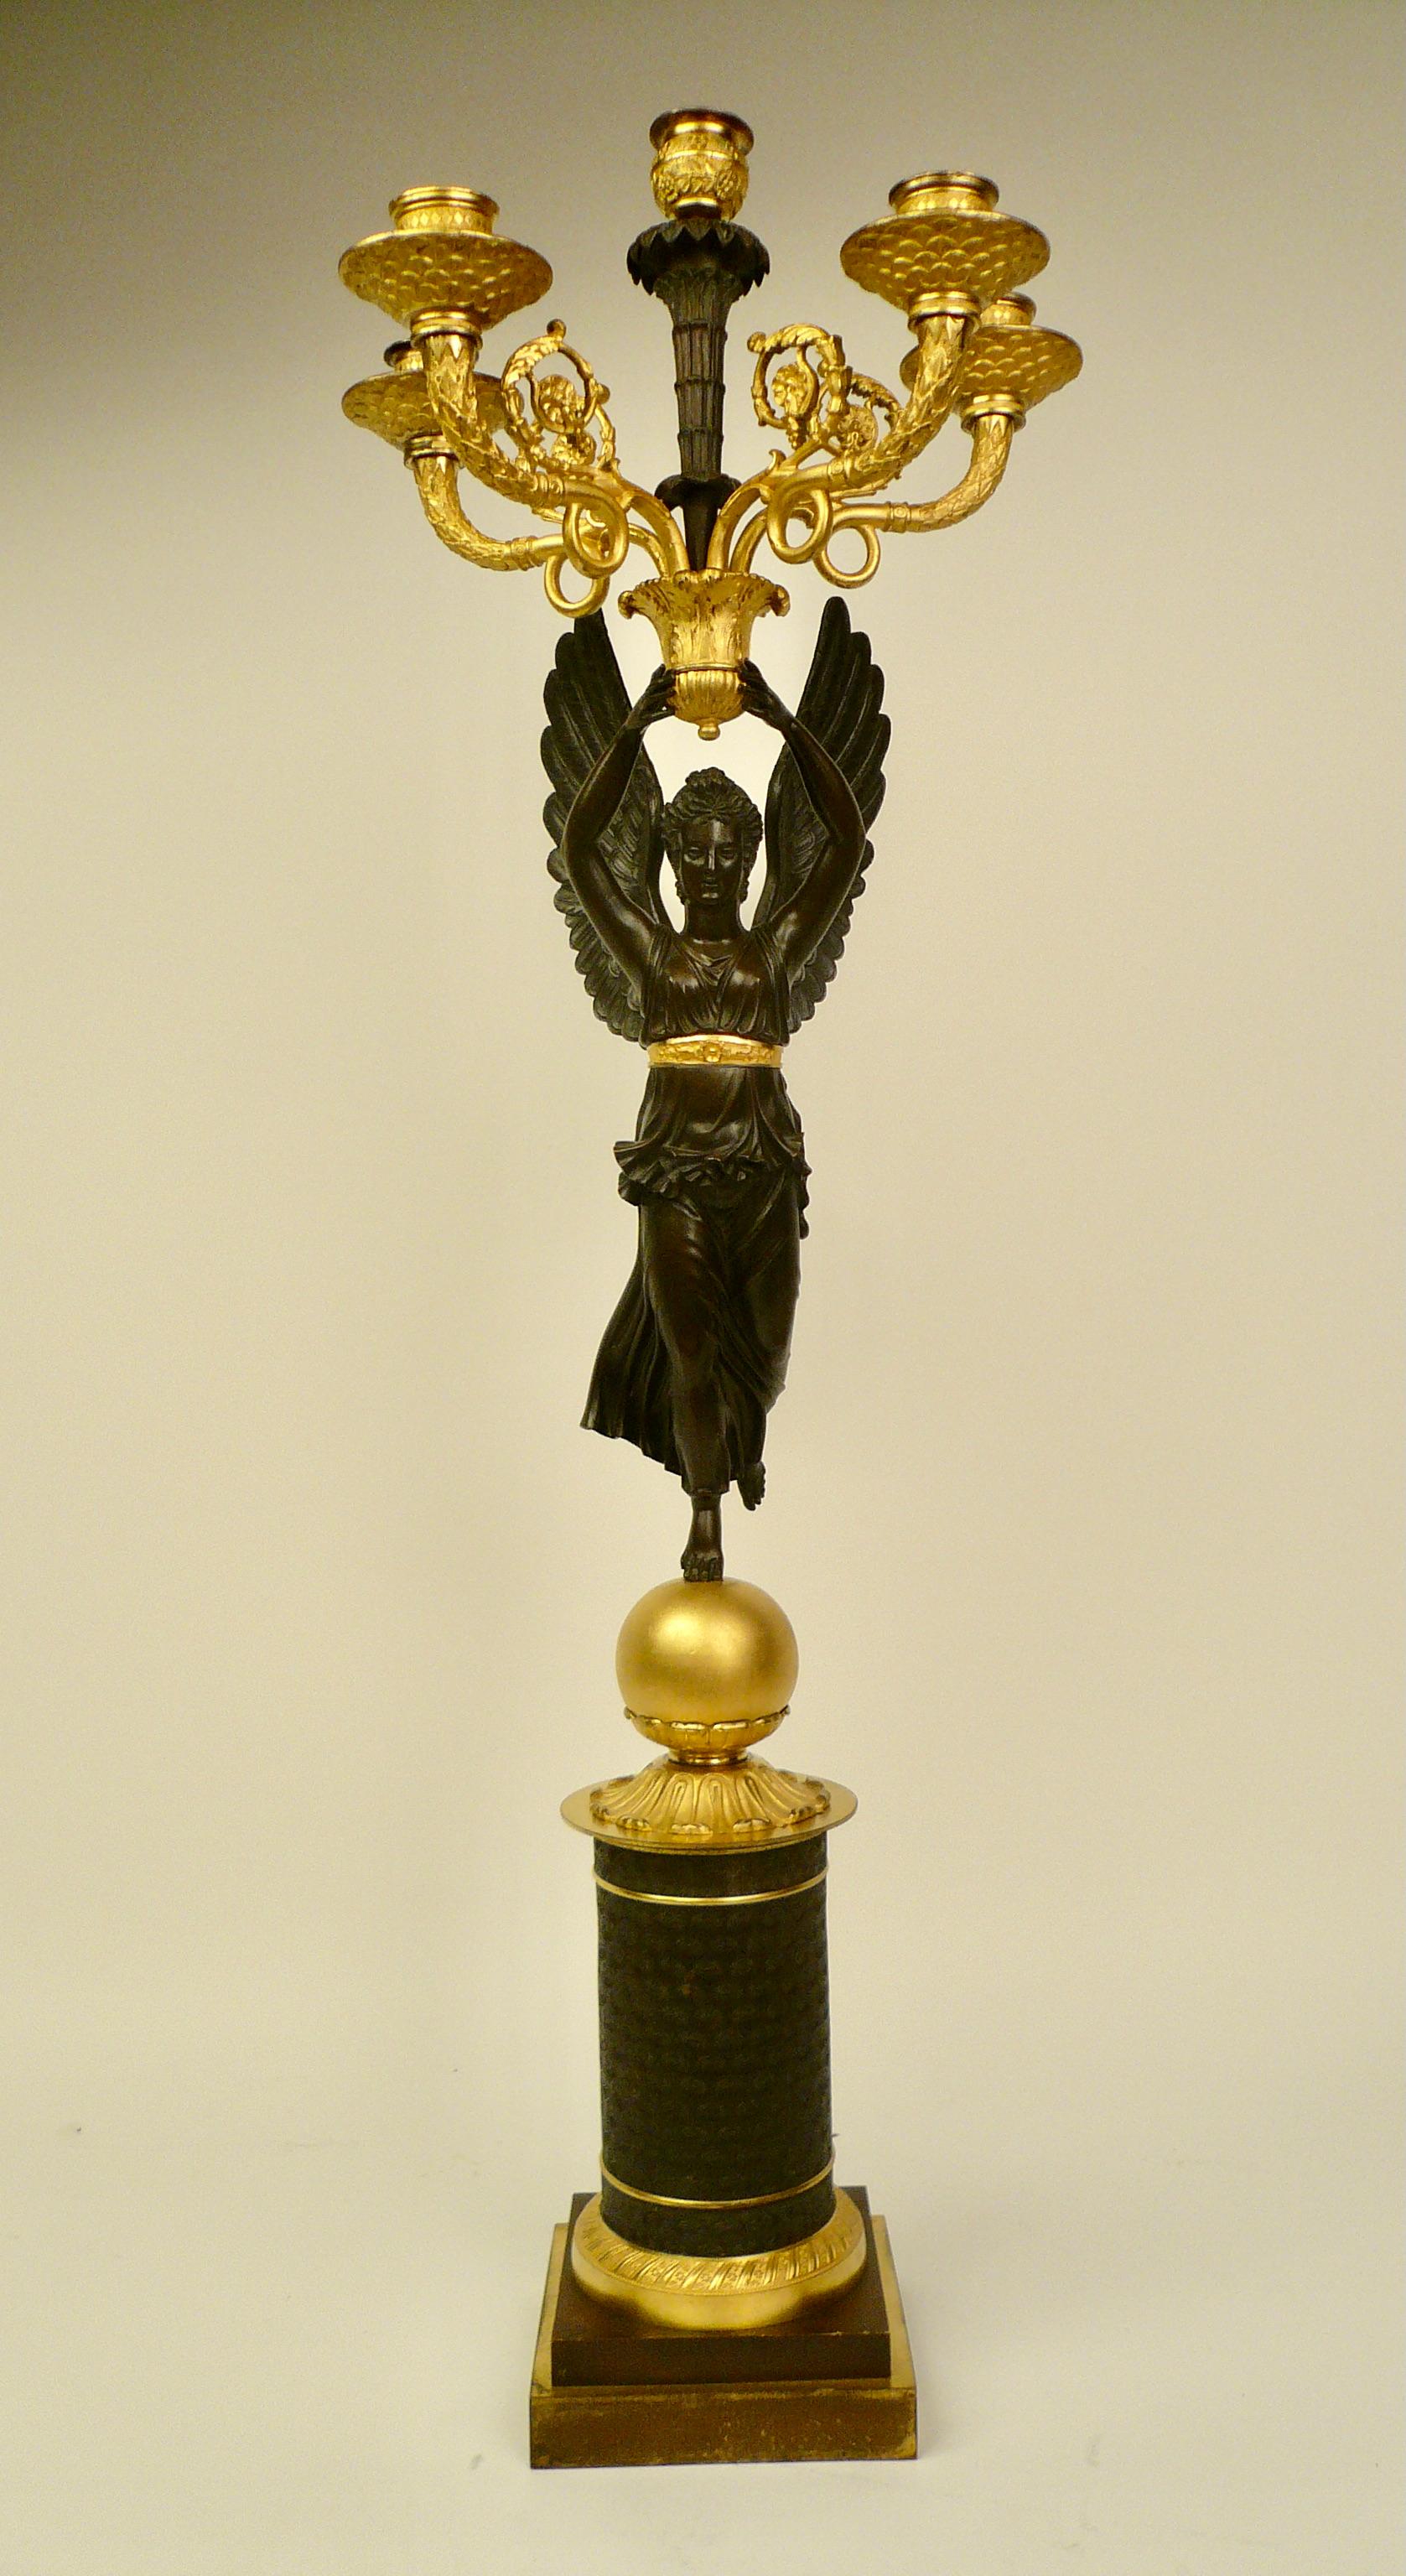 This stately patinated and fire gilt bronze candelabrum is of the finest quality, and retains its original finish.
The figure of Nike (Winged Victory) standing on a gilt globe holds aloft a five light candelabrum.
       